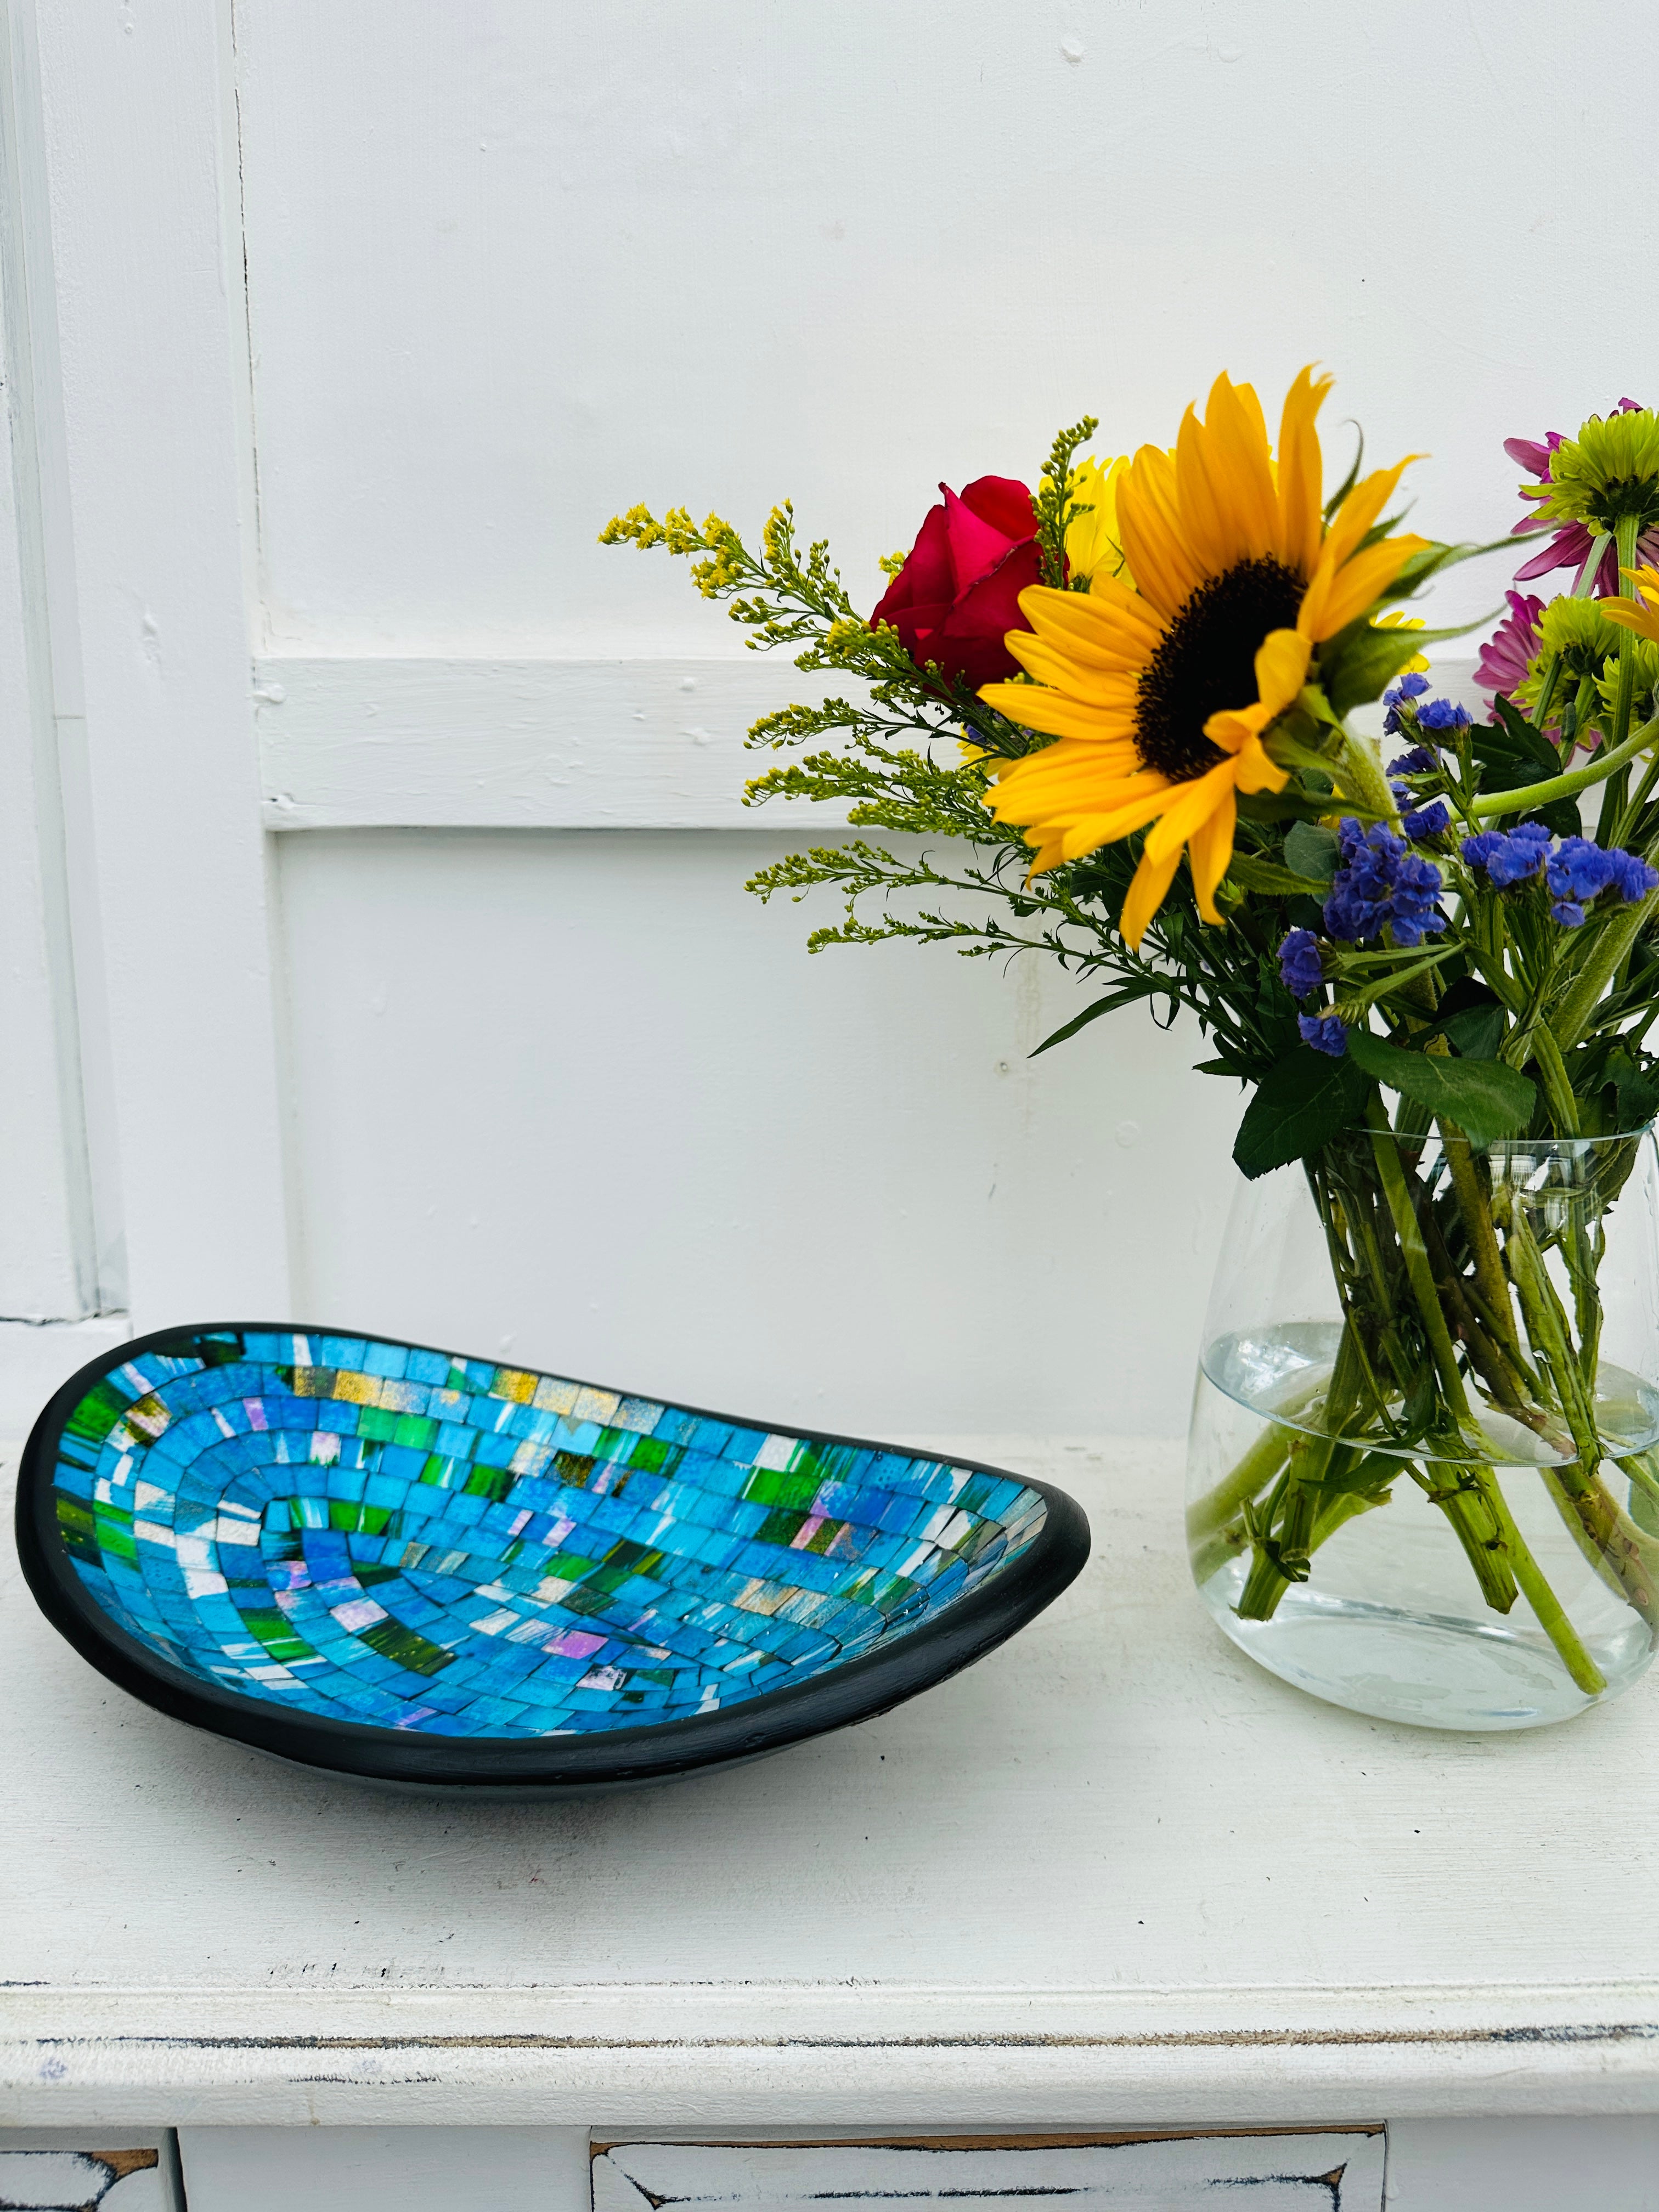 display view of mosaic oval bowl next to a vase of flowers